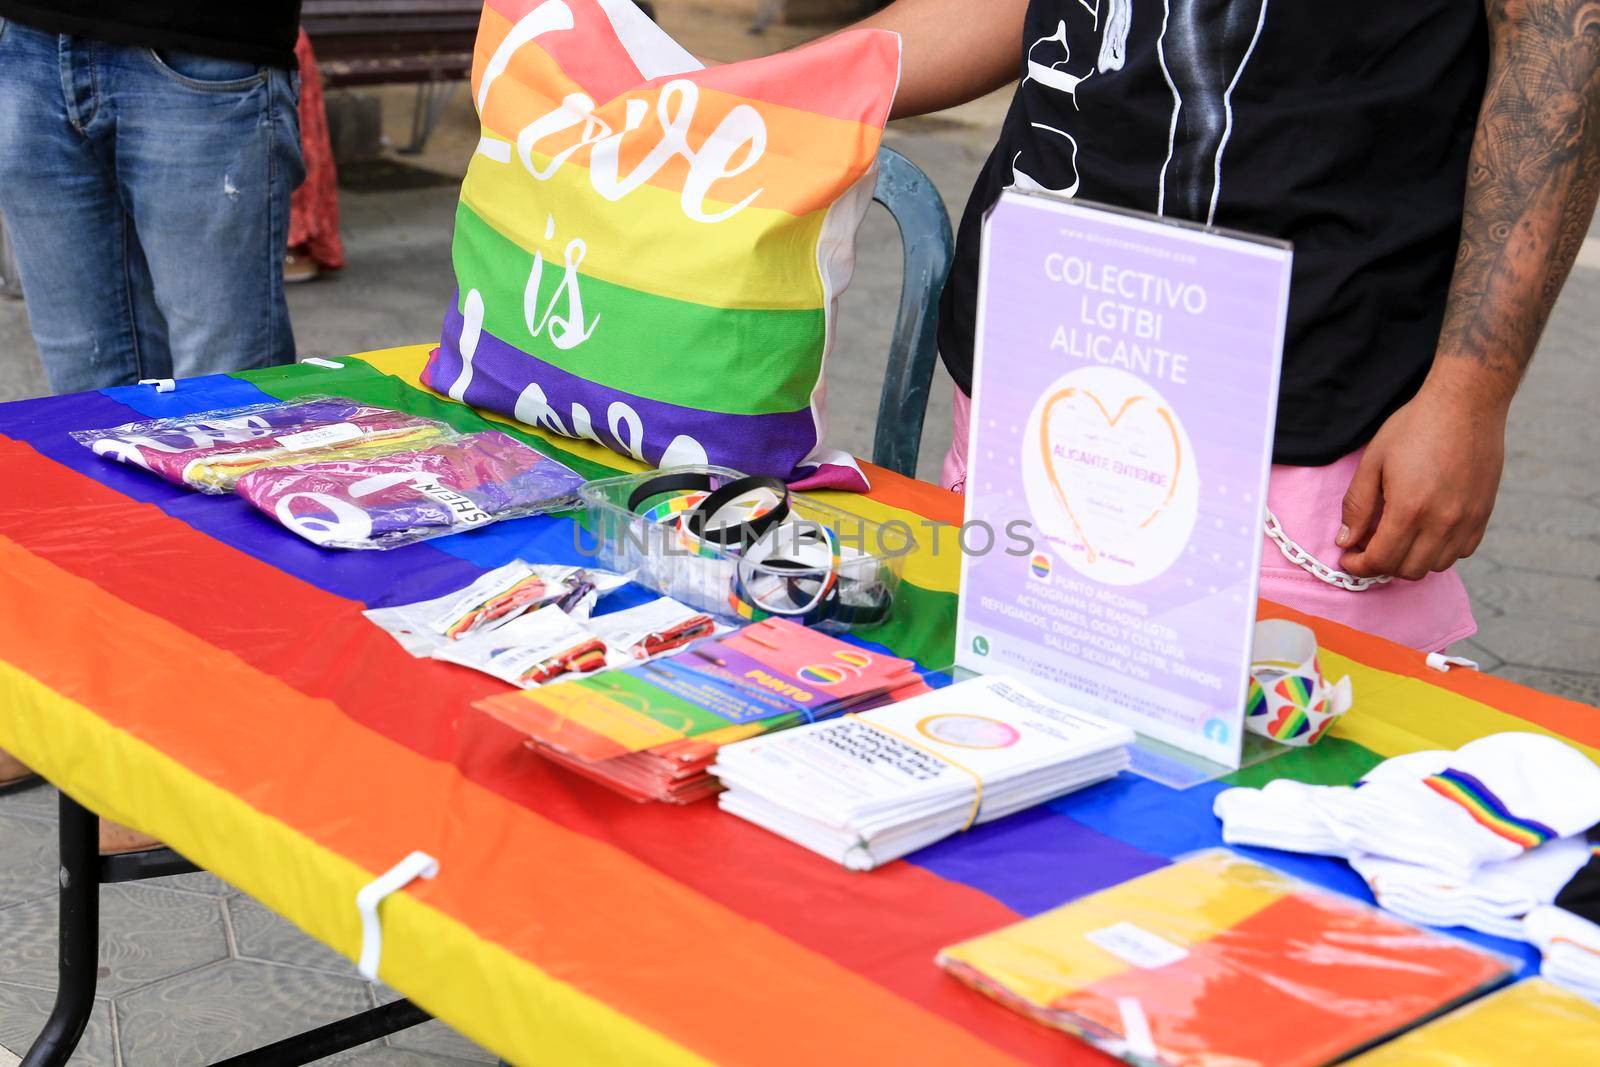 Merchandise Stands selling items at the Gay Pride Festival by soniabonet